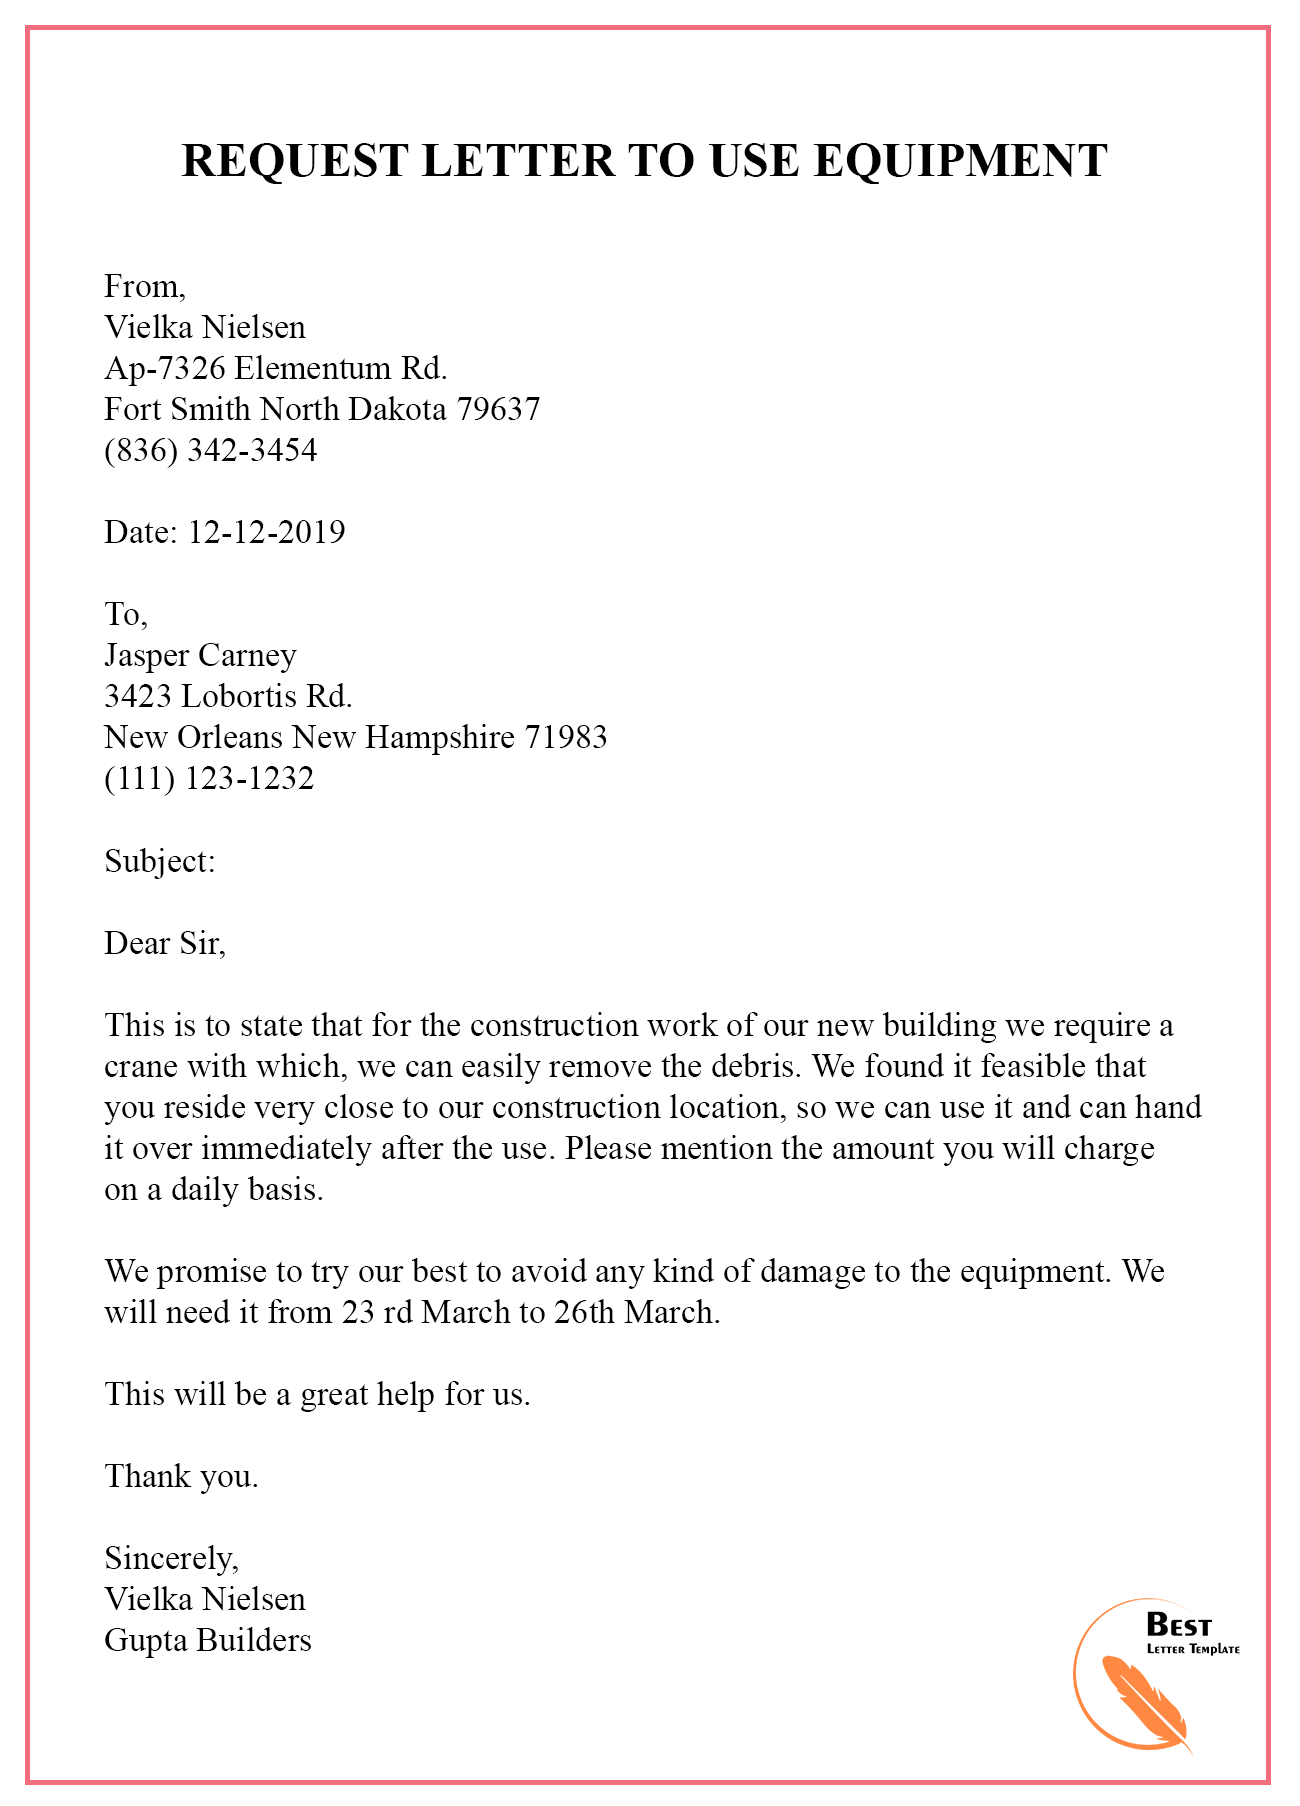 Request Letter Template for Permission - Format Sample ...